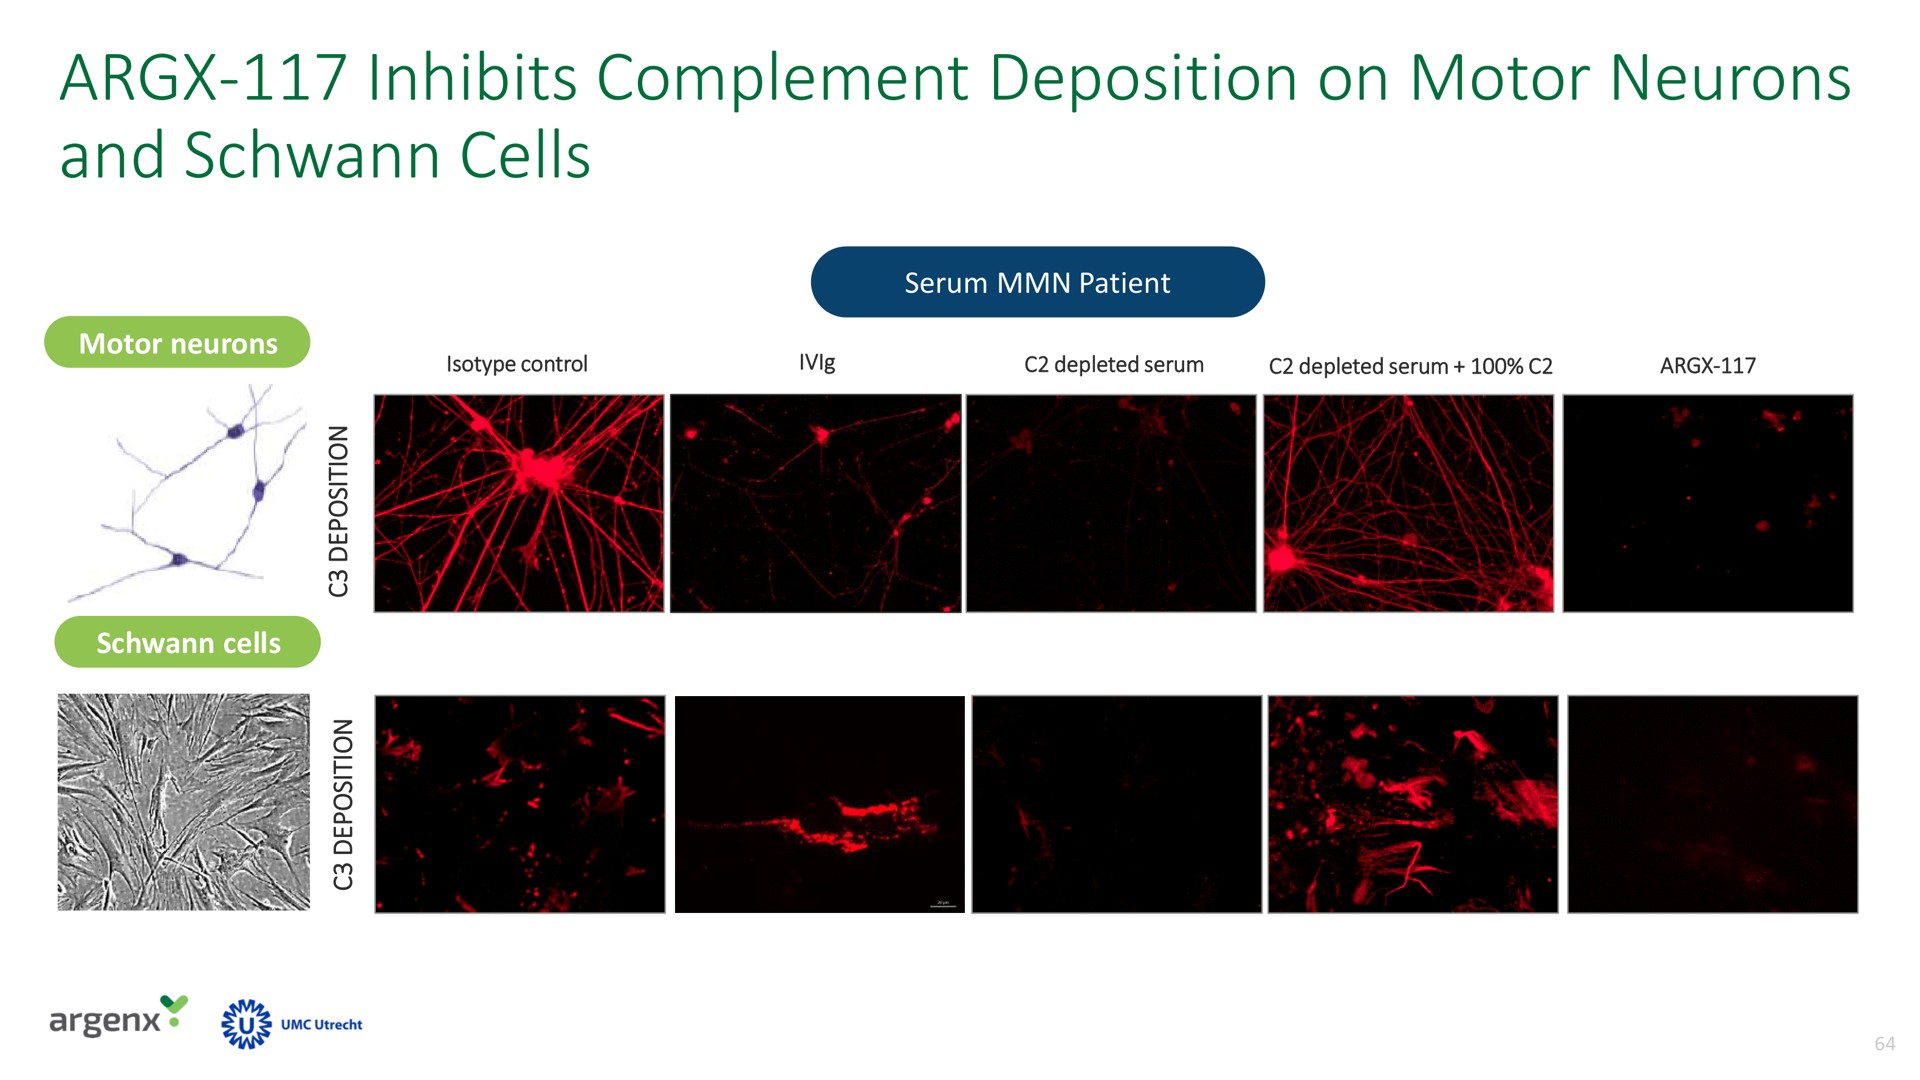 inhibits complement deposition on motor neurons and cells | argenx SE